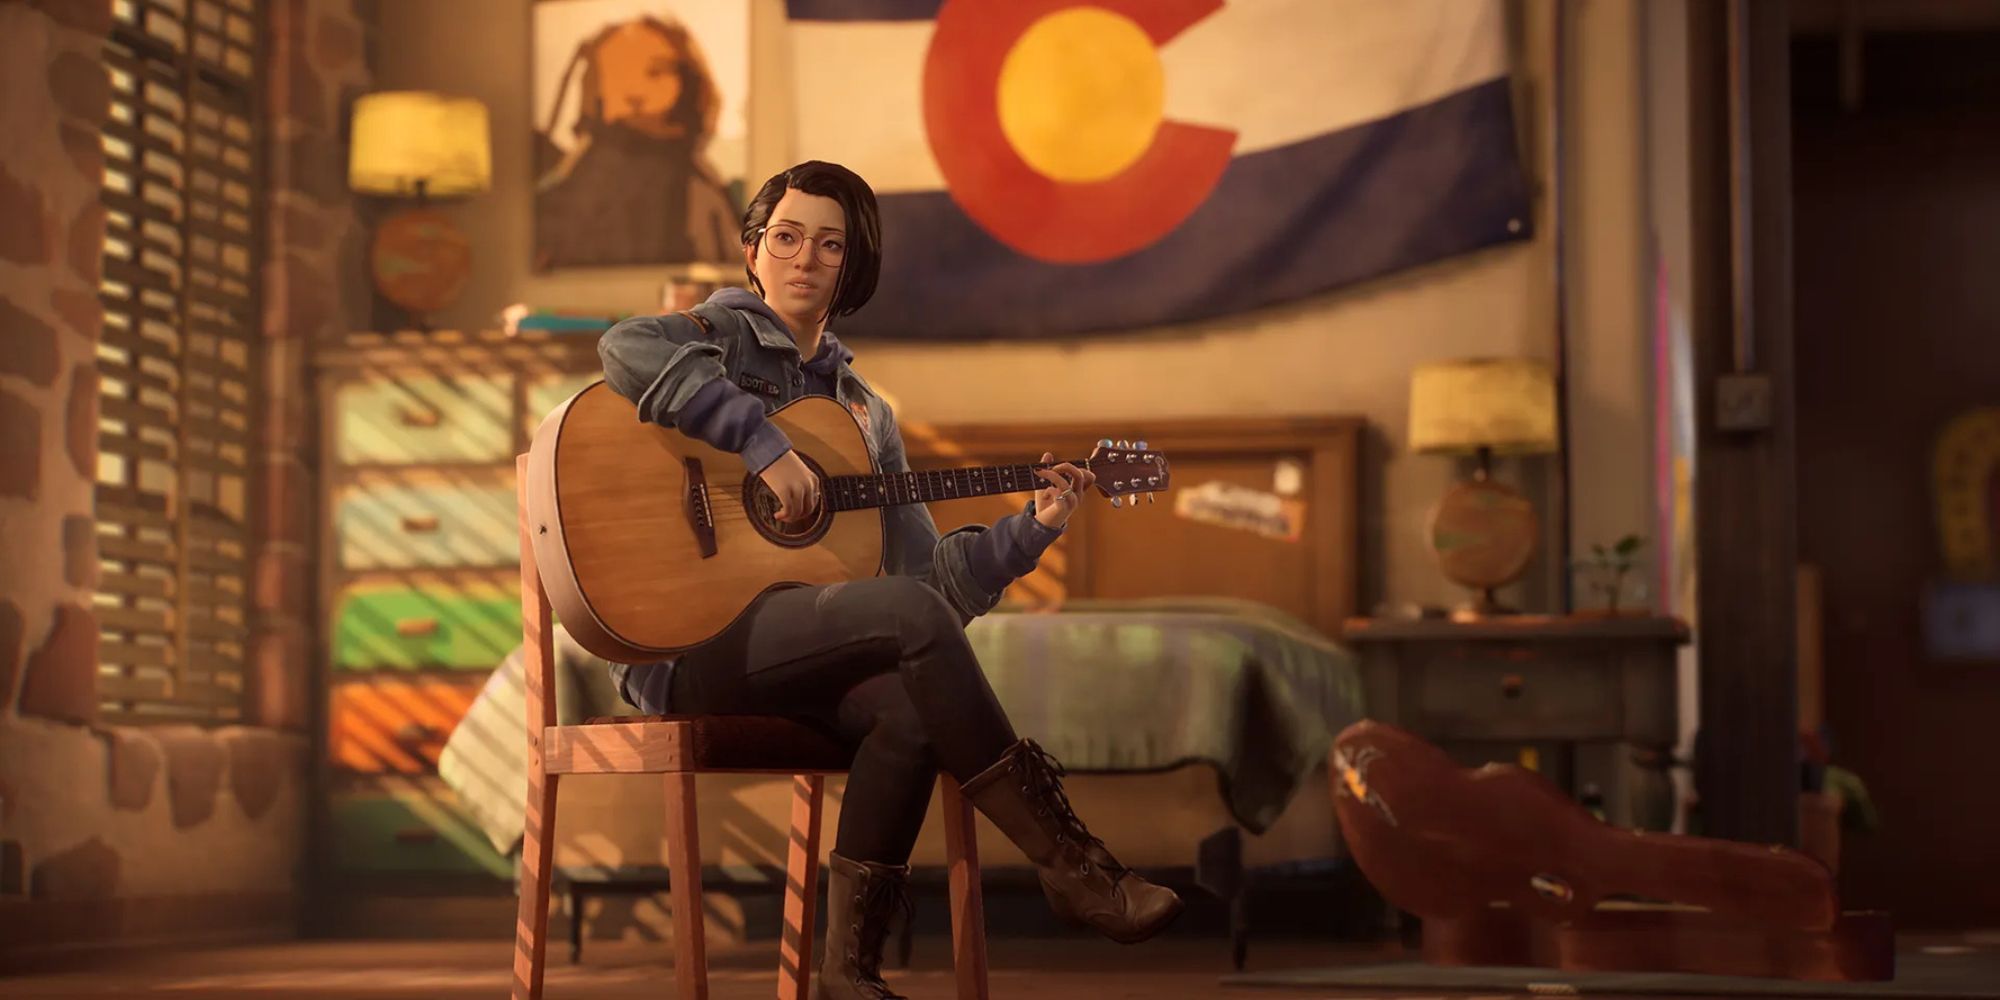 Alex Chen, the protagonist of Life is Strange: True Colors holding a guitar in an emotional scene